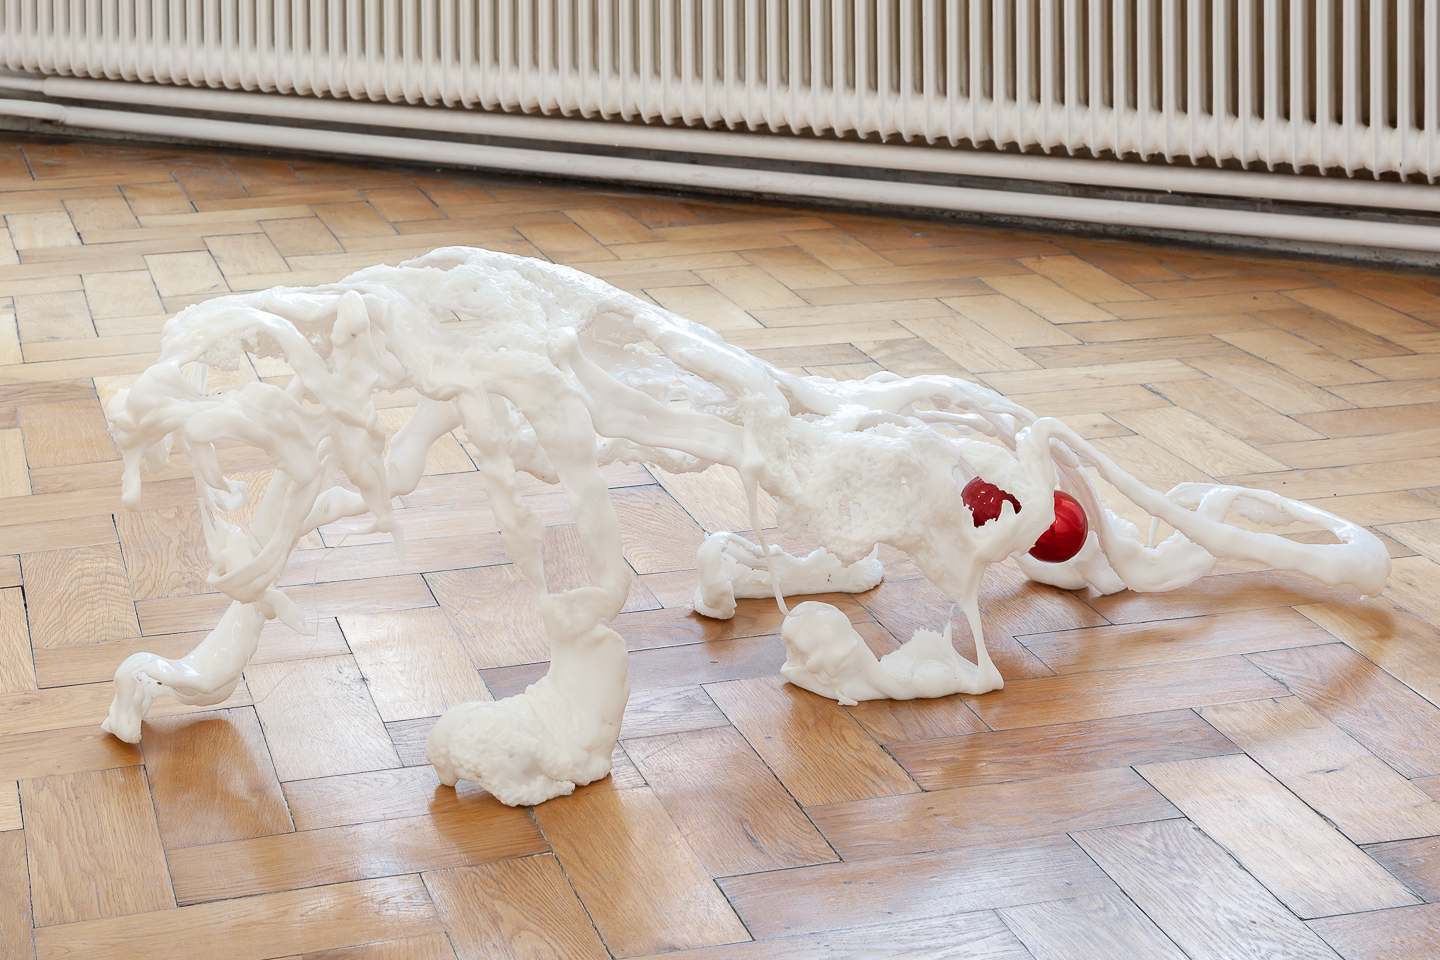 Raphaela Vogel*1988 in Nürnberg, lives and works in BerlinTesticles of the Tiger2022, Polyurethane-Elastomer, Weihnachtsbaumkugeln40 x 110 x 40 cm (circa) Photography: Flavio Palasciano